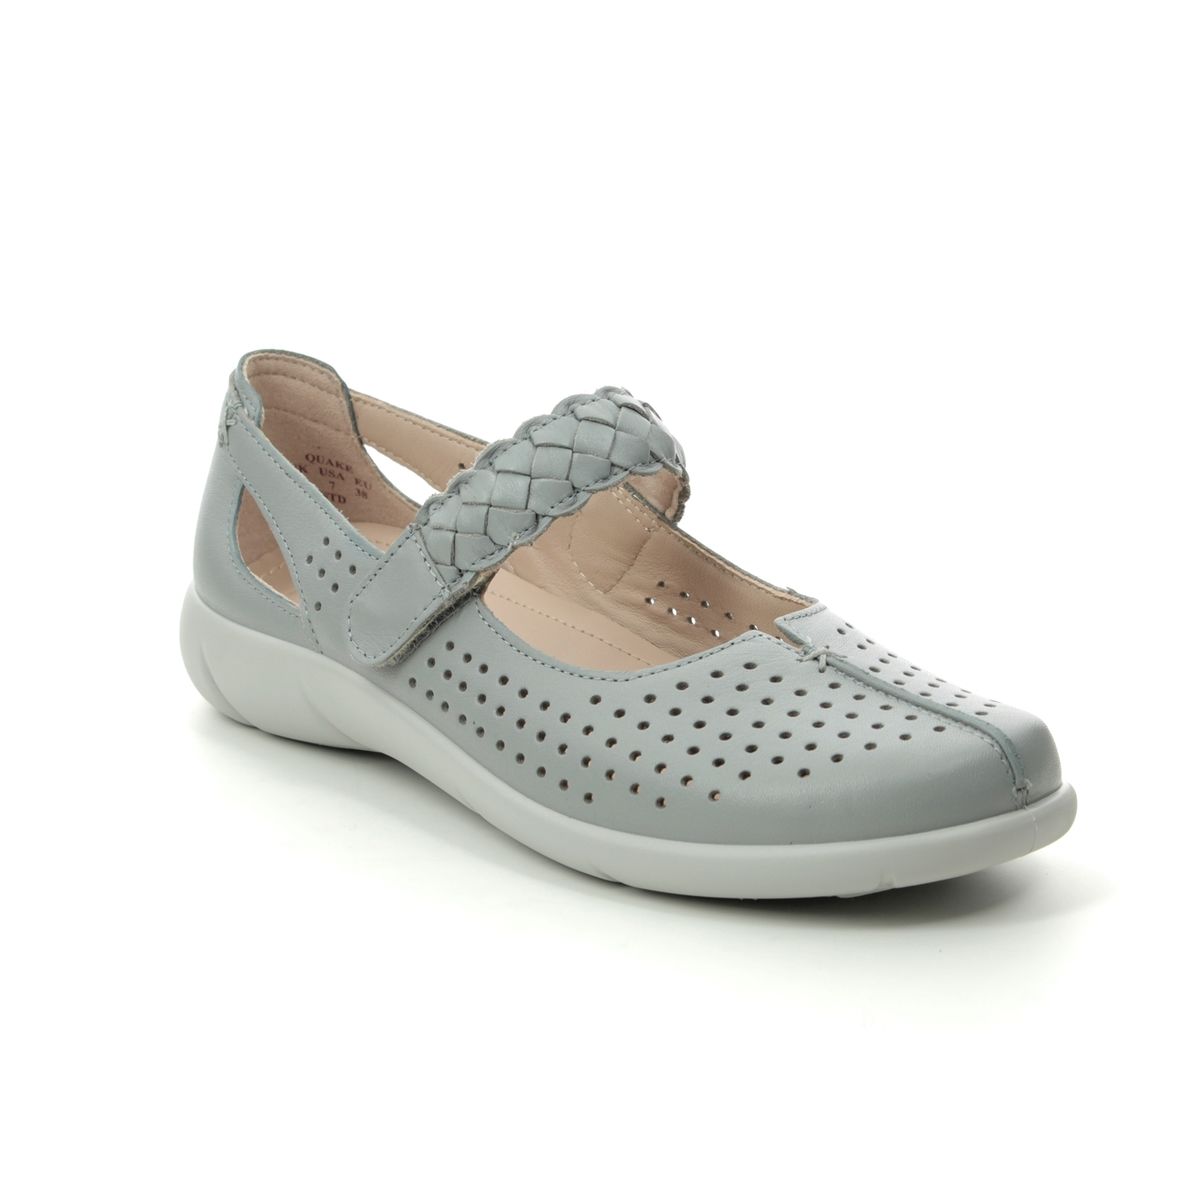 Hotter Quake E Fit 0106-00 Grey leather 